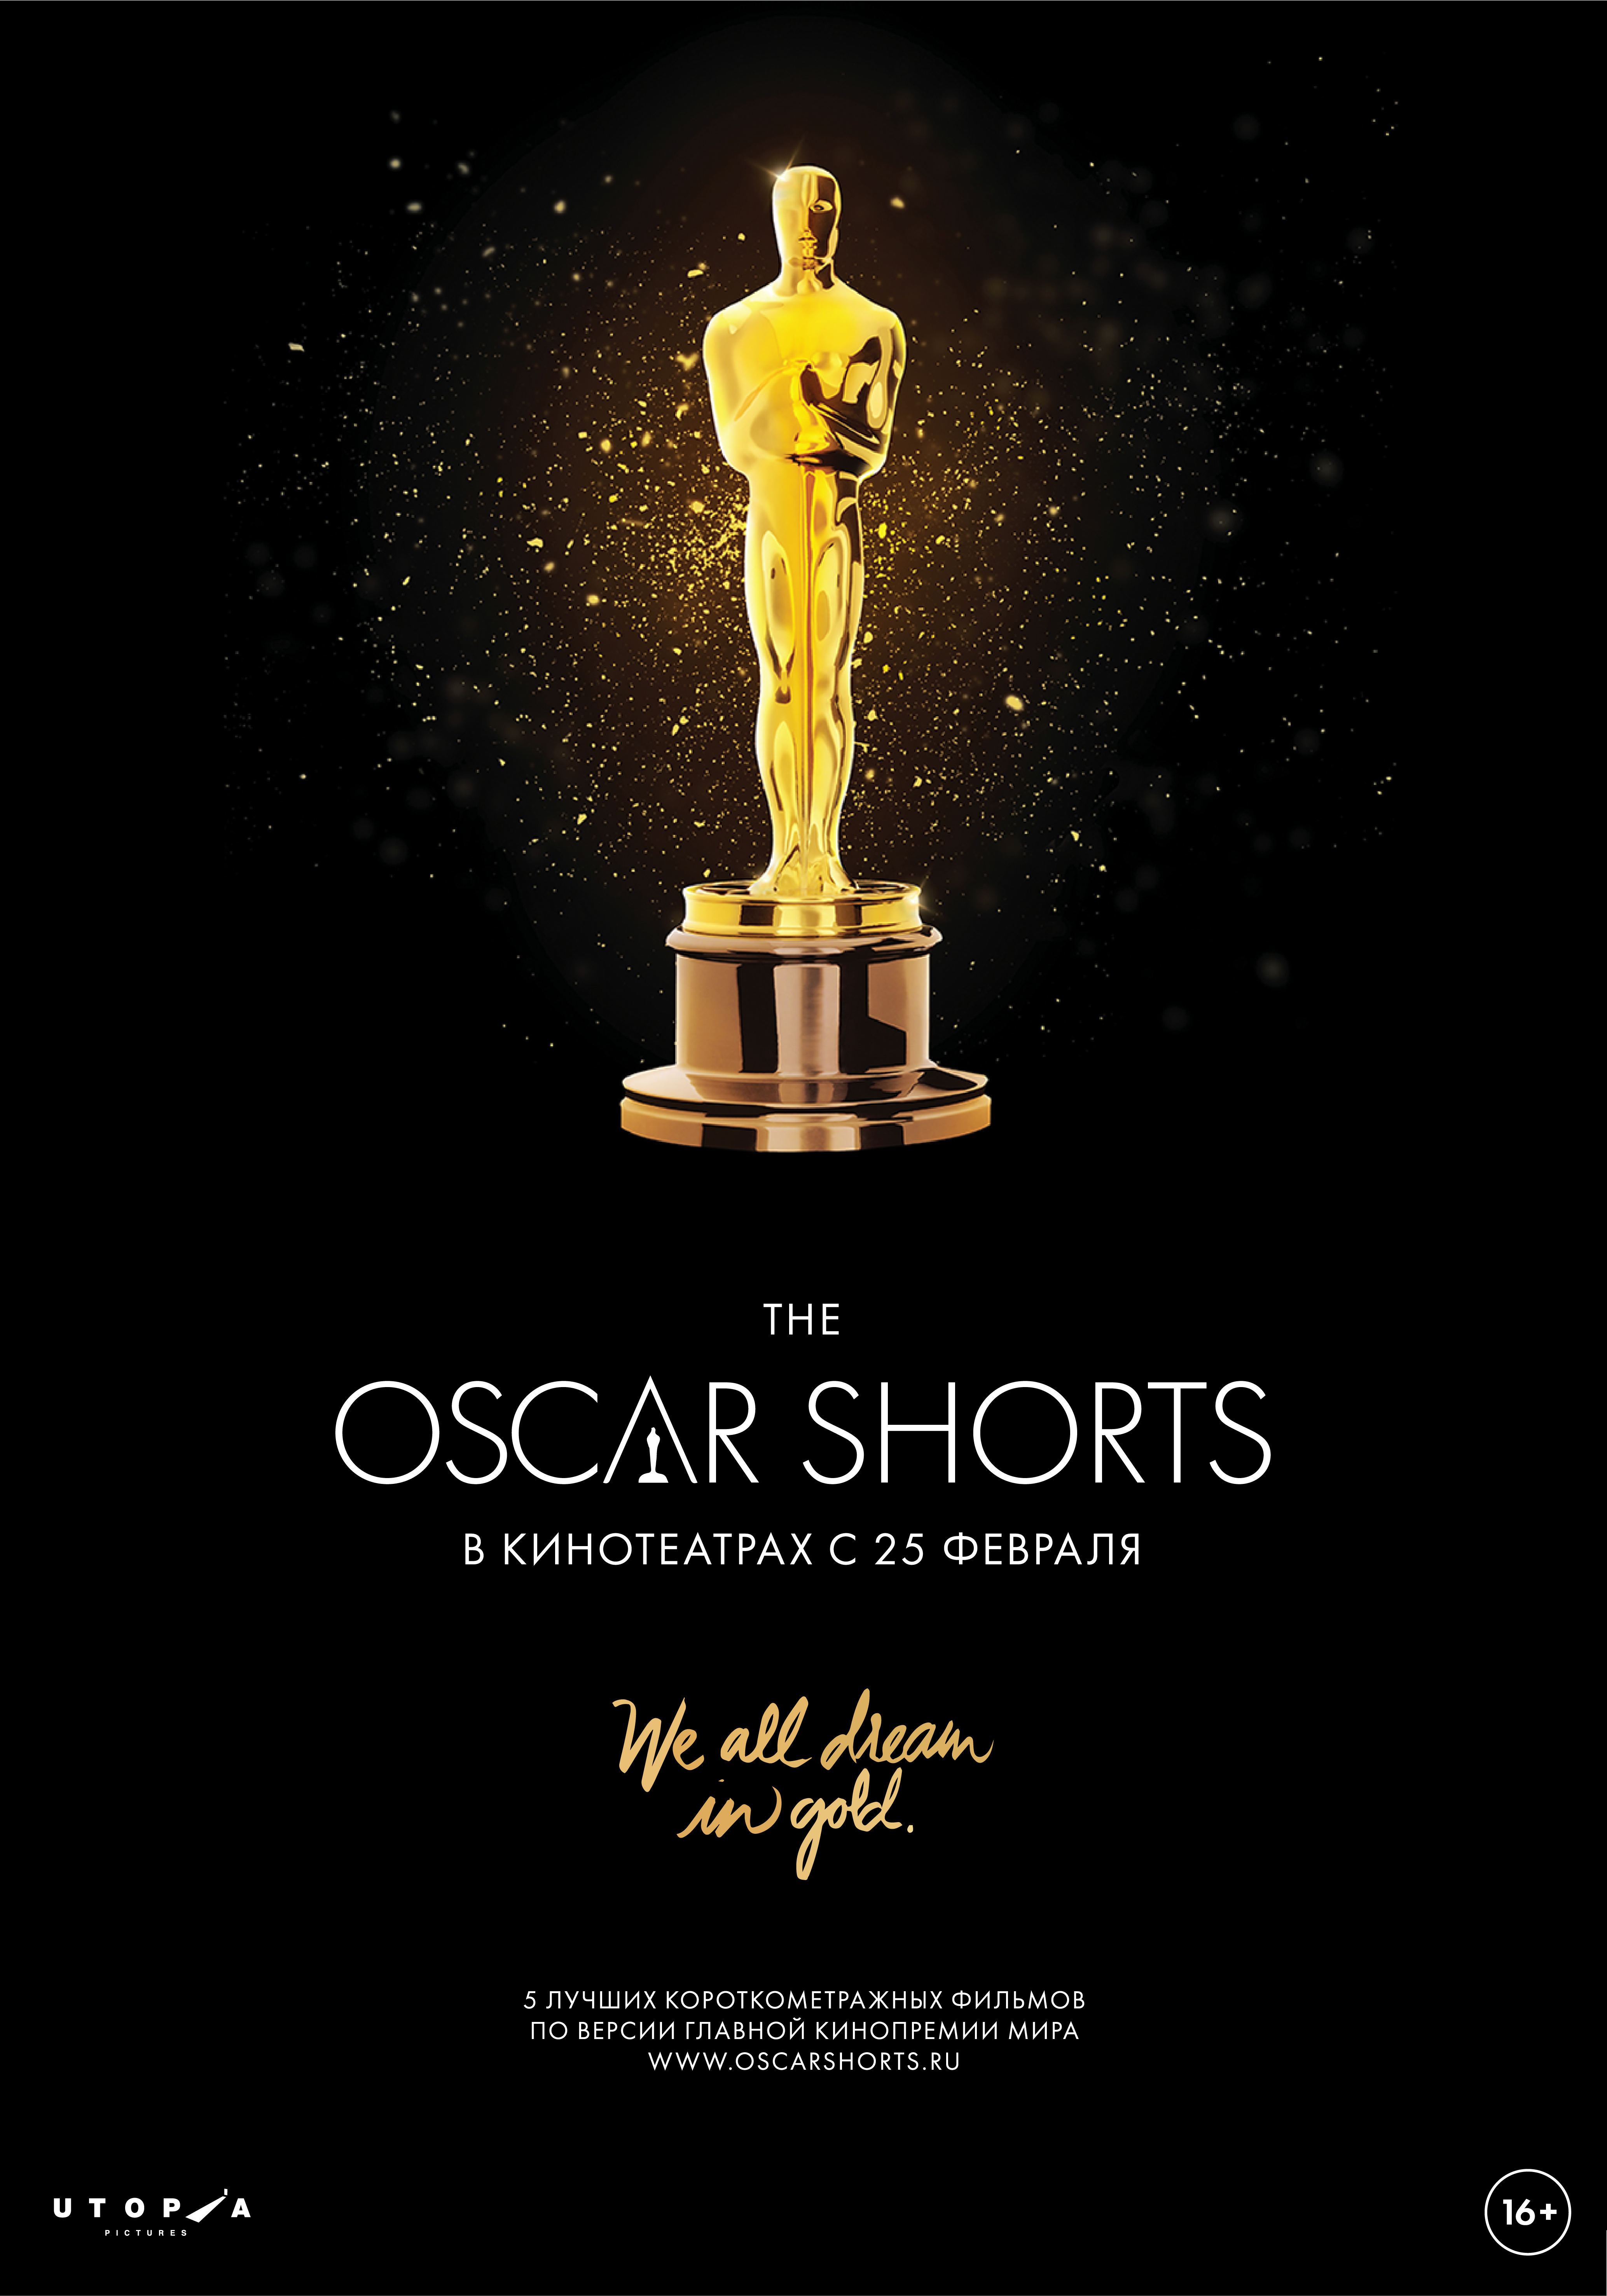 Oscar shorts 2020 Live Action. Оскар. Премия Оскар. Плакат Оскар.